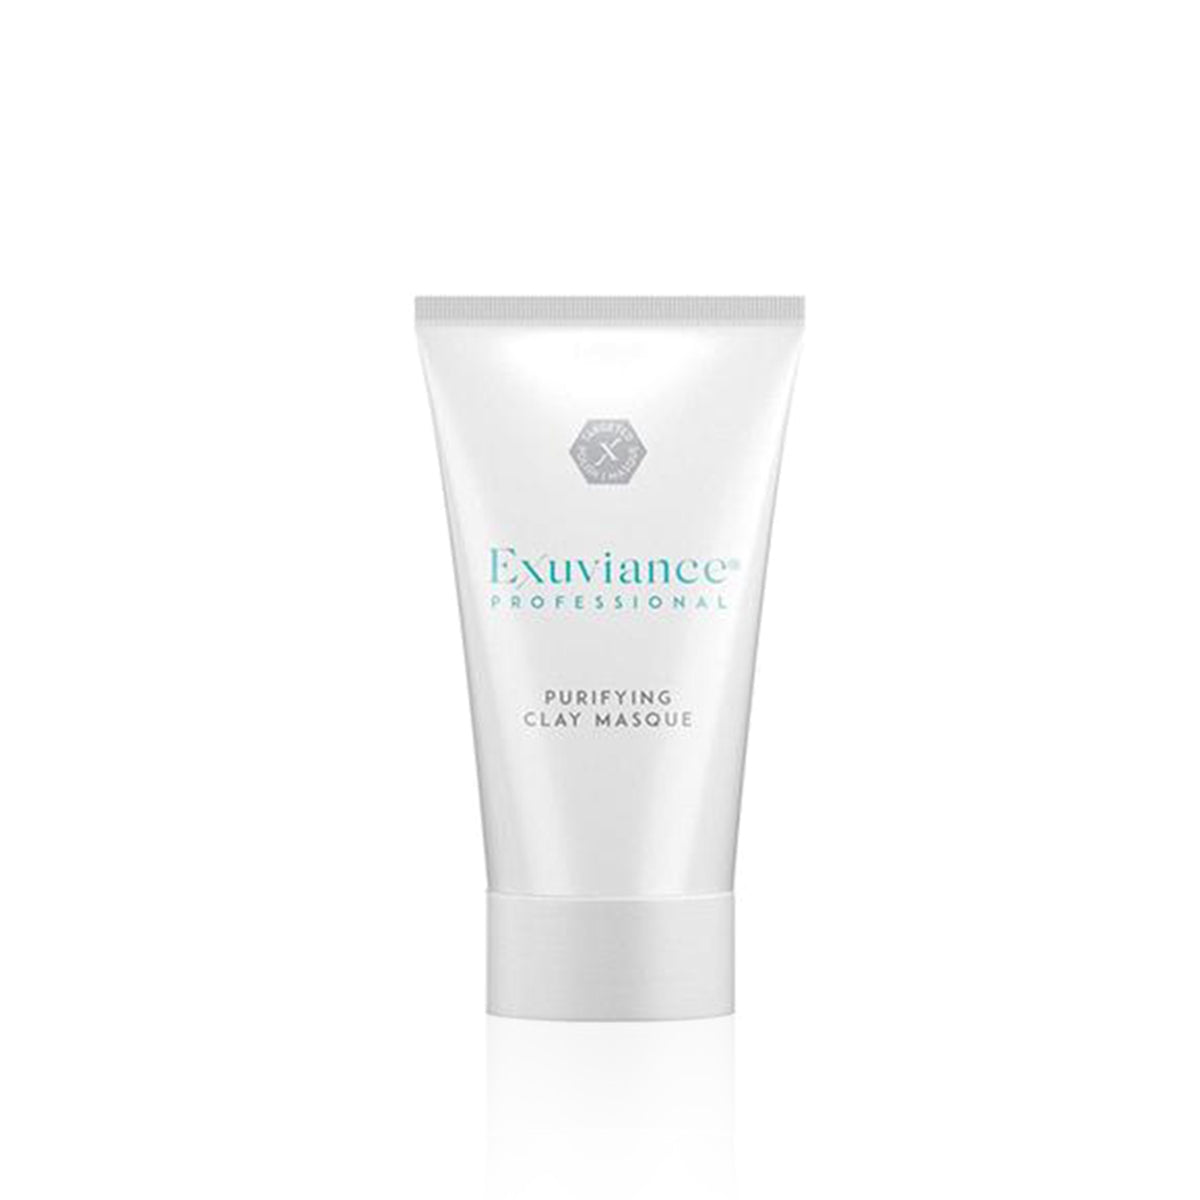 Exuviance Deep Cleansing and Regenerating Mask | Purifying Clay Masque 50g